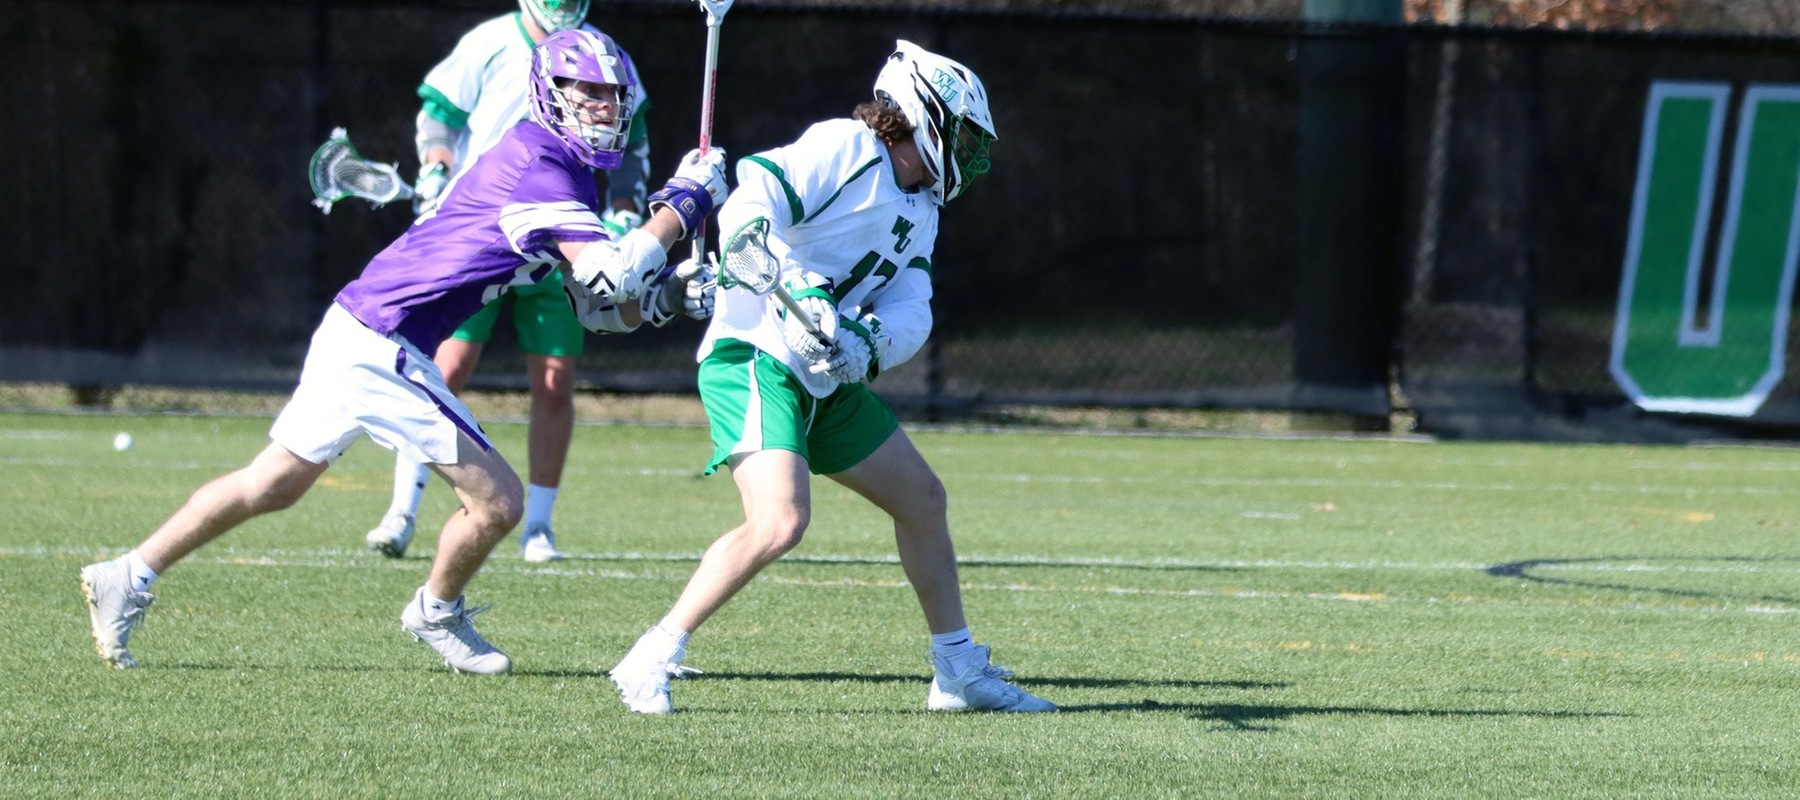 Photo of Jacob Herman scoring one of his team leading three goals against St. Michael's. copyright 2022; Wilmington University. All rights reserved. Photo by Mitchell Coll. March 16, 2022 vs. St. Michael's.